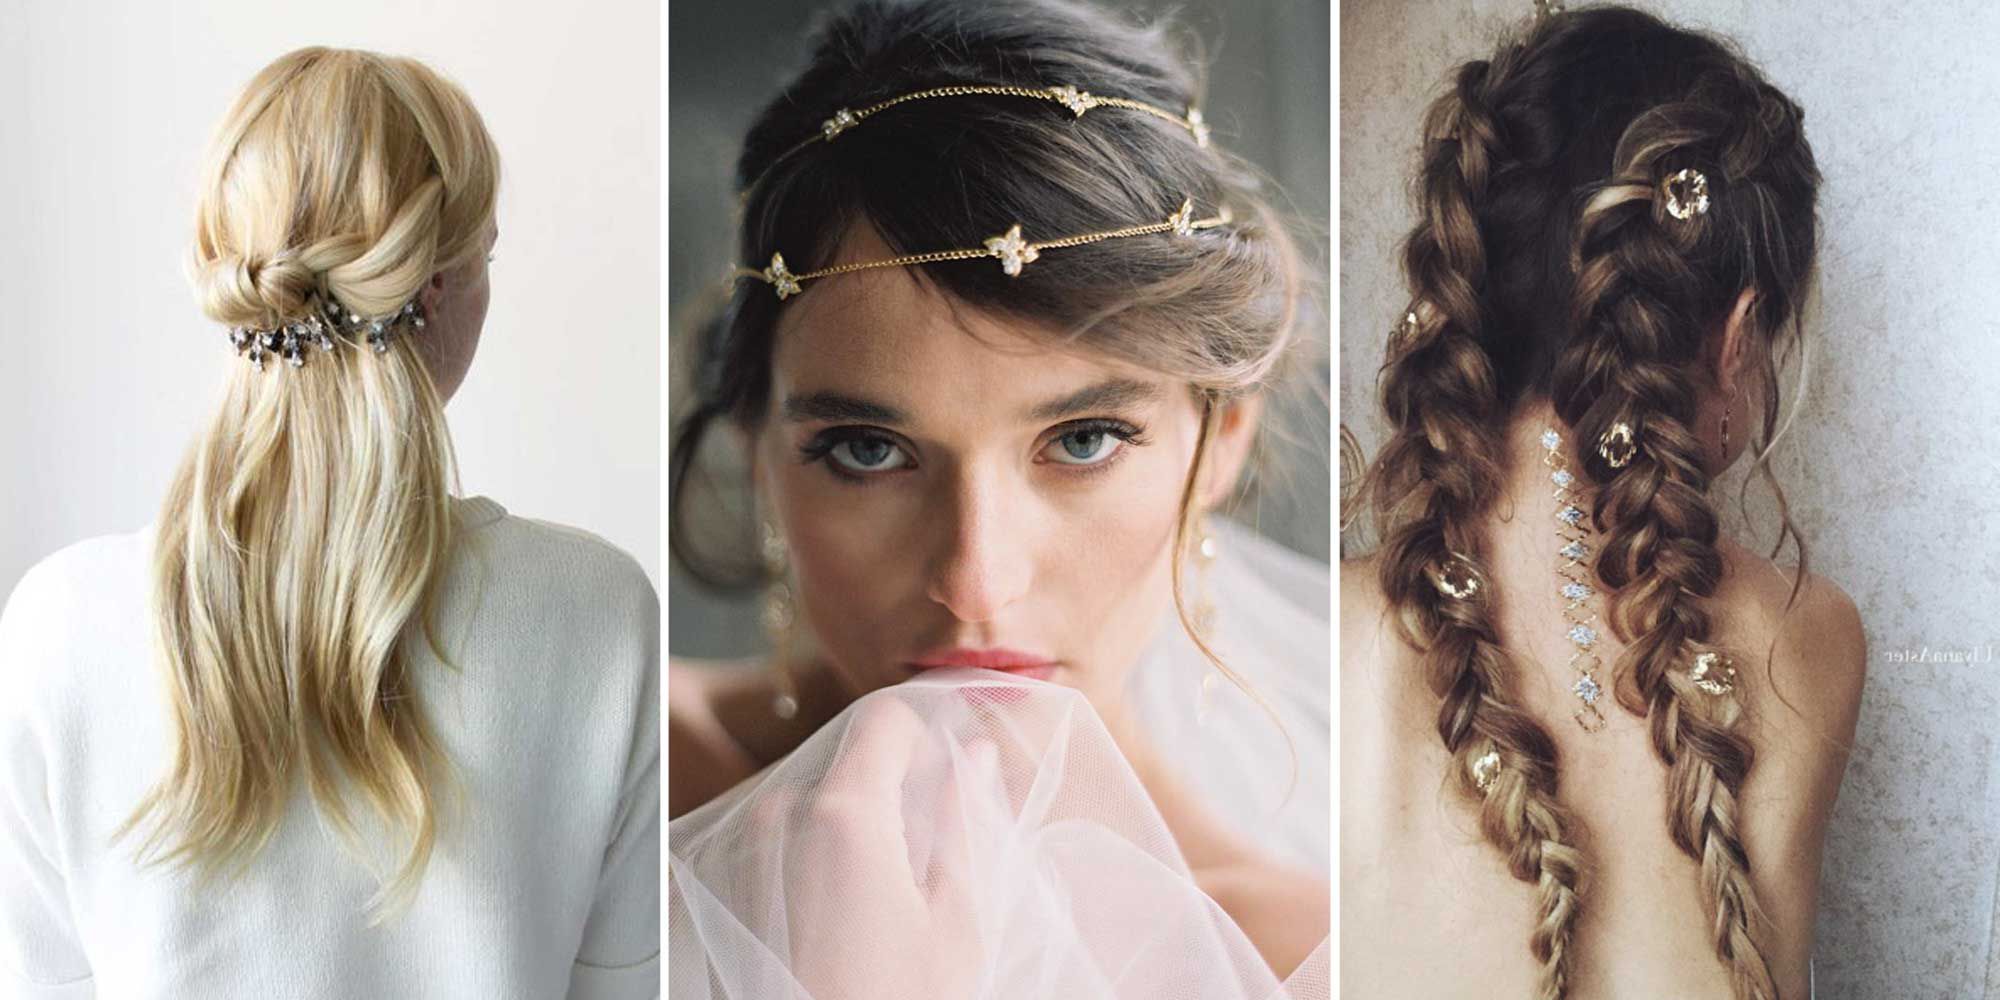 Ways To Wear Hair Jewelry – Beautiful Hair Accessories Intended For Most Recent Wavy Low Bun Bridal Hairstyles With Hair Accessory (View 16 of 20)